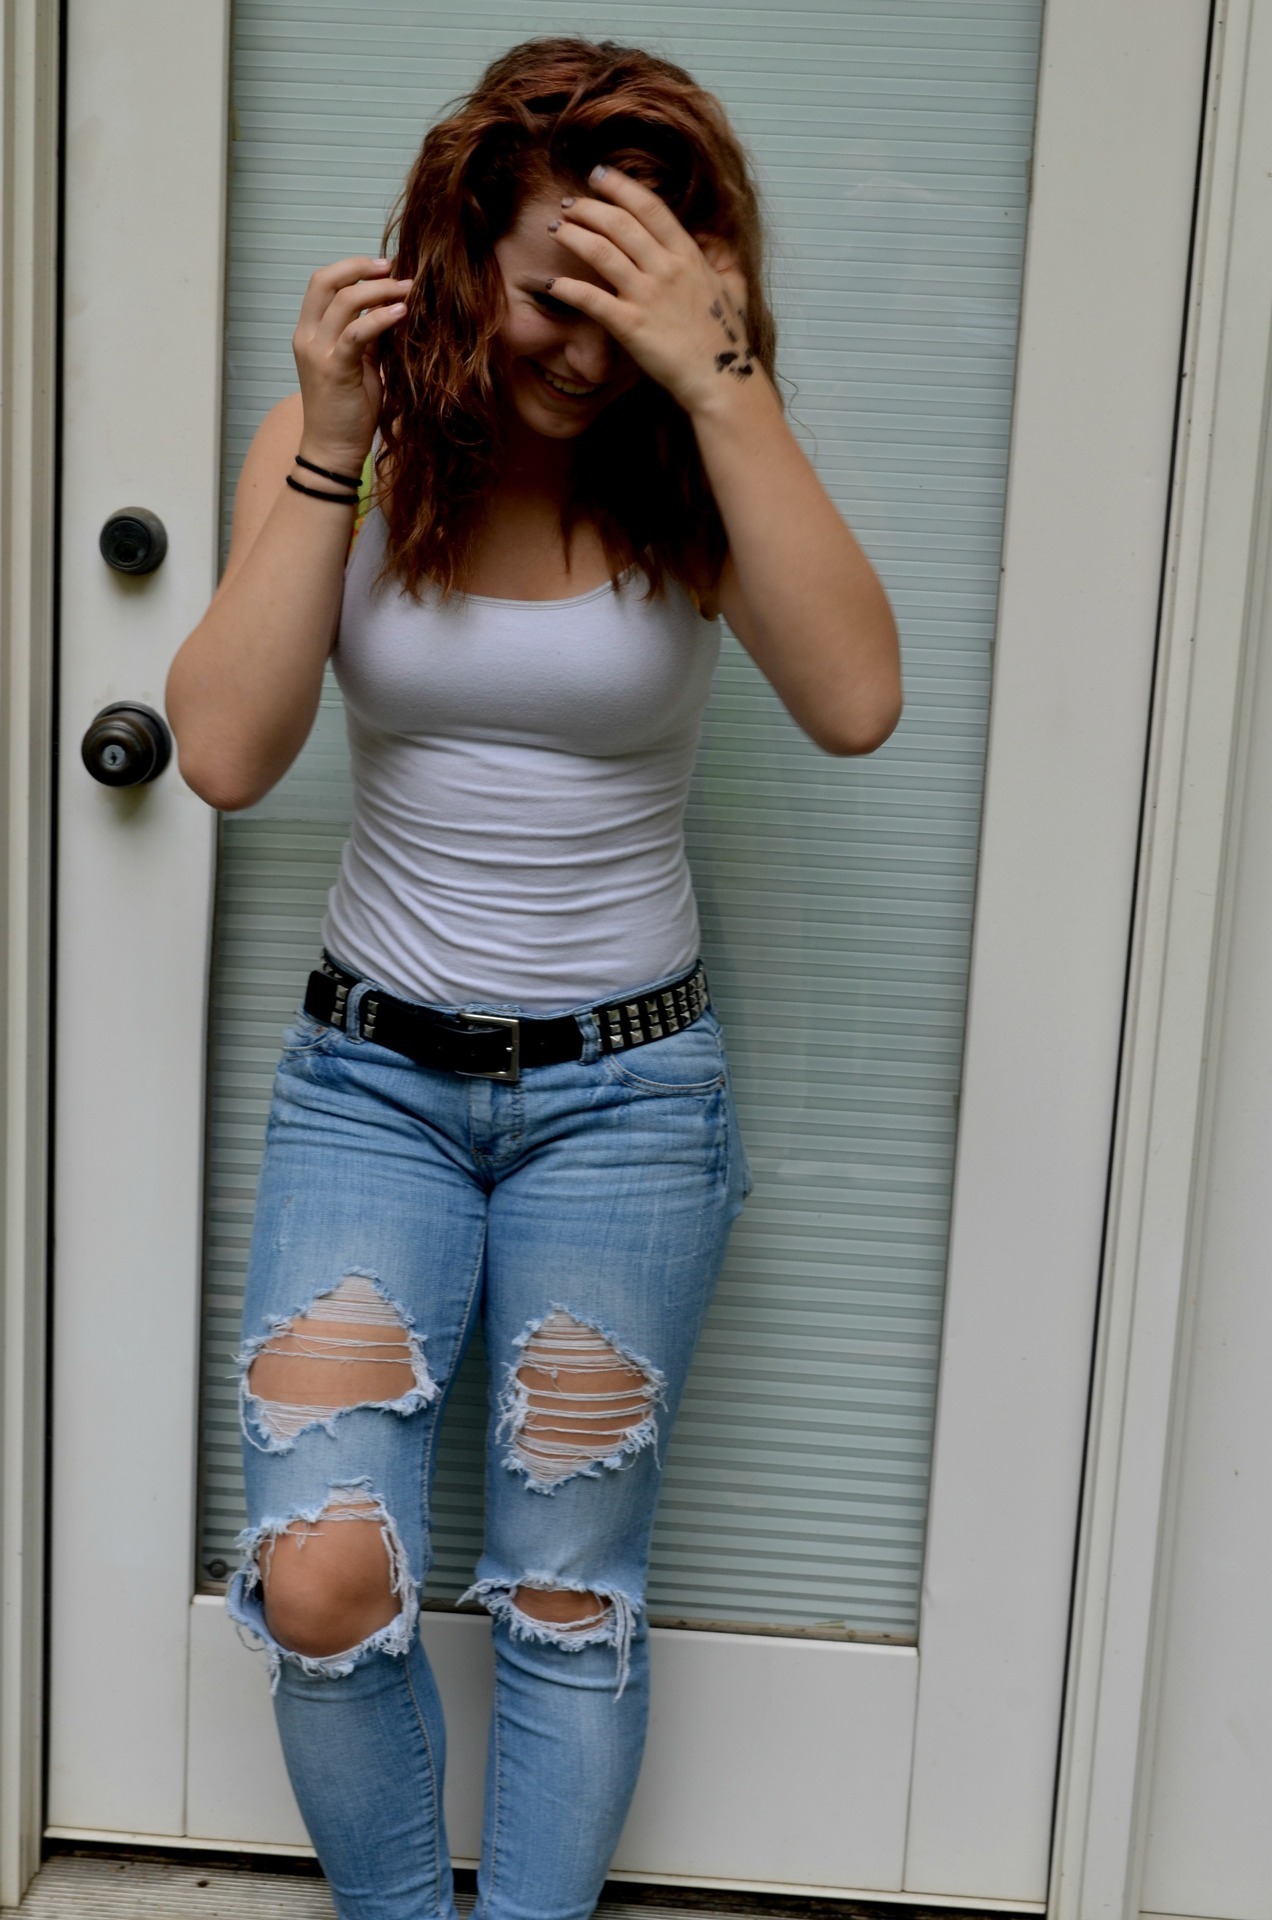 Jeans with Belts — Love the jeans, love the belt, love the top!